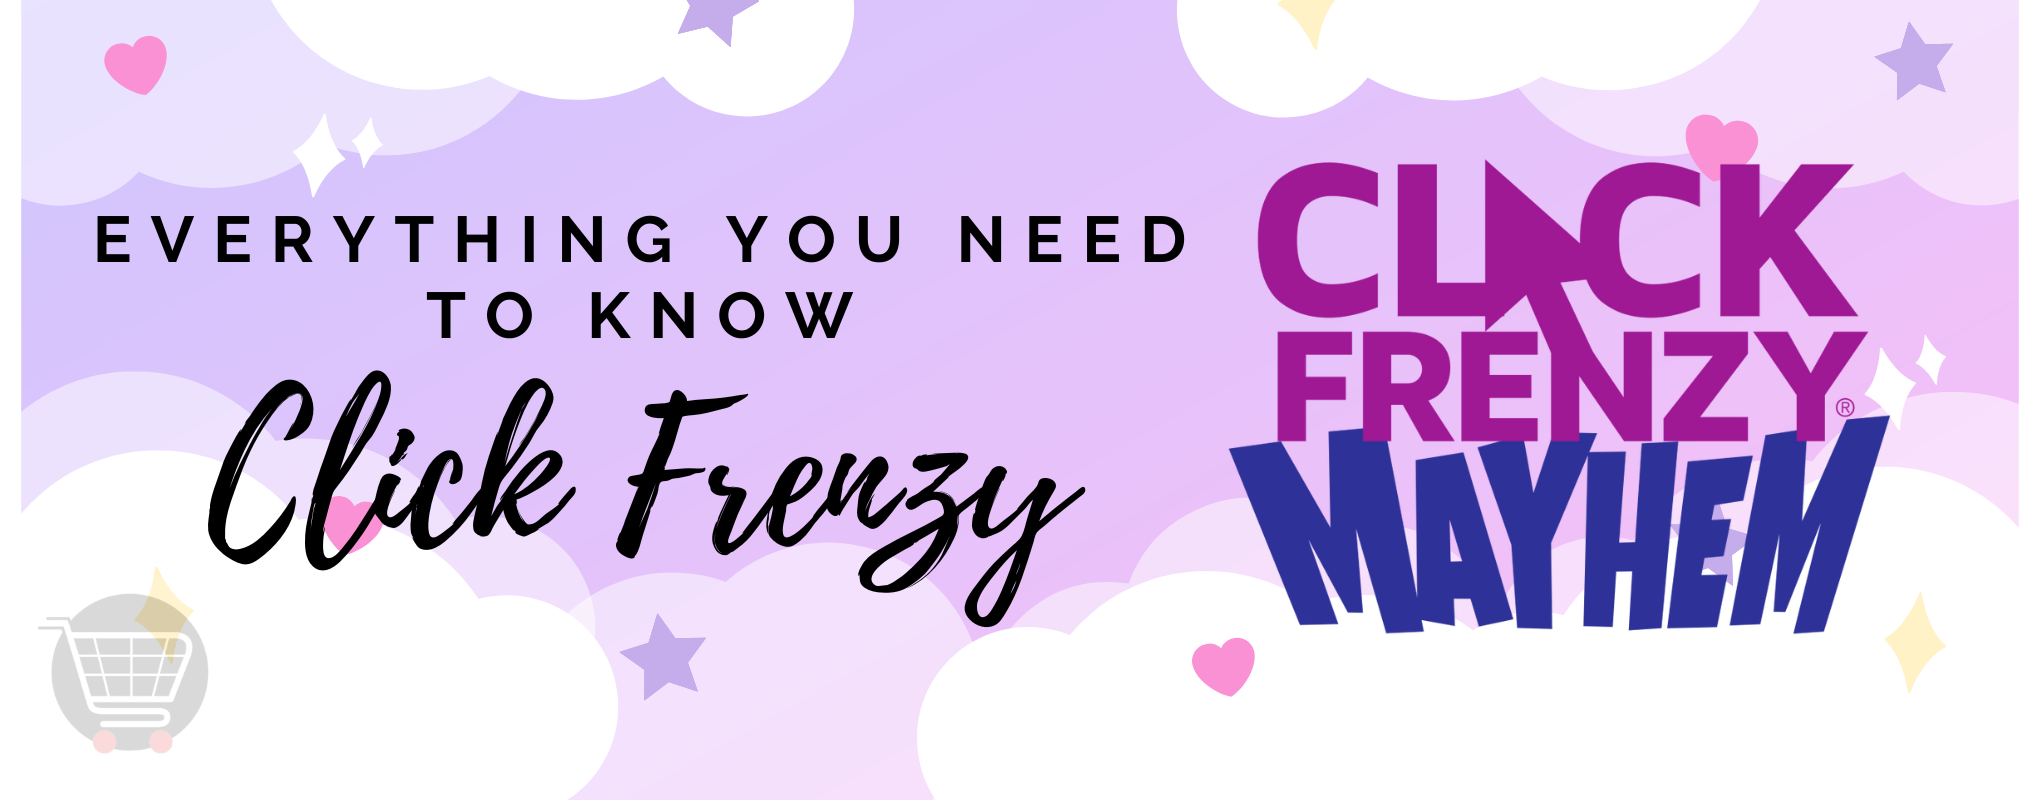 Click Frenzy Is Here! But What Does That Mean?